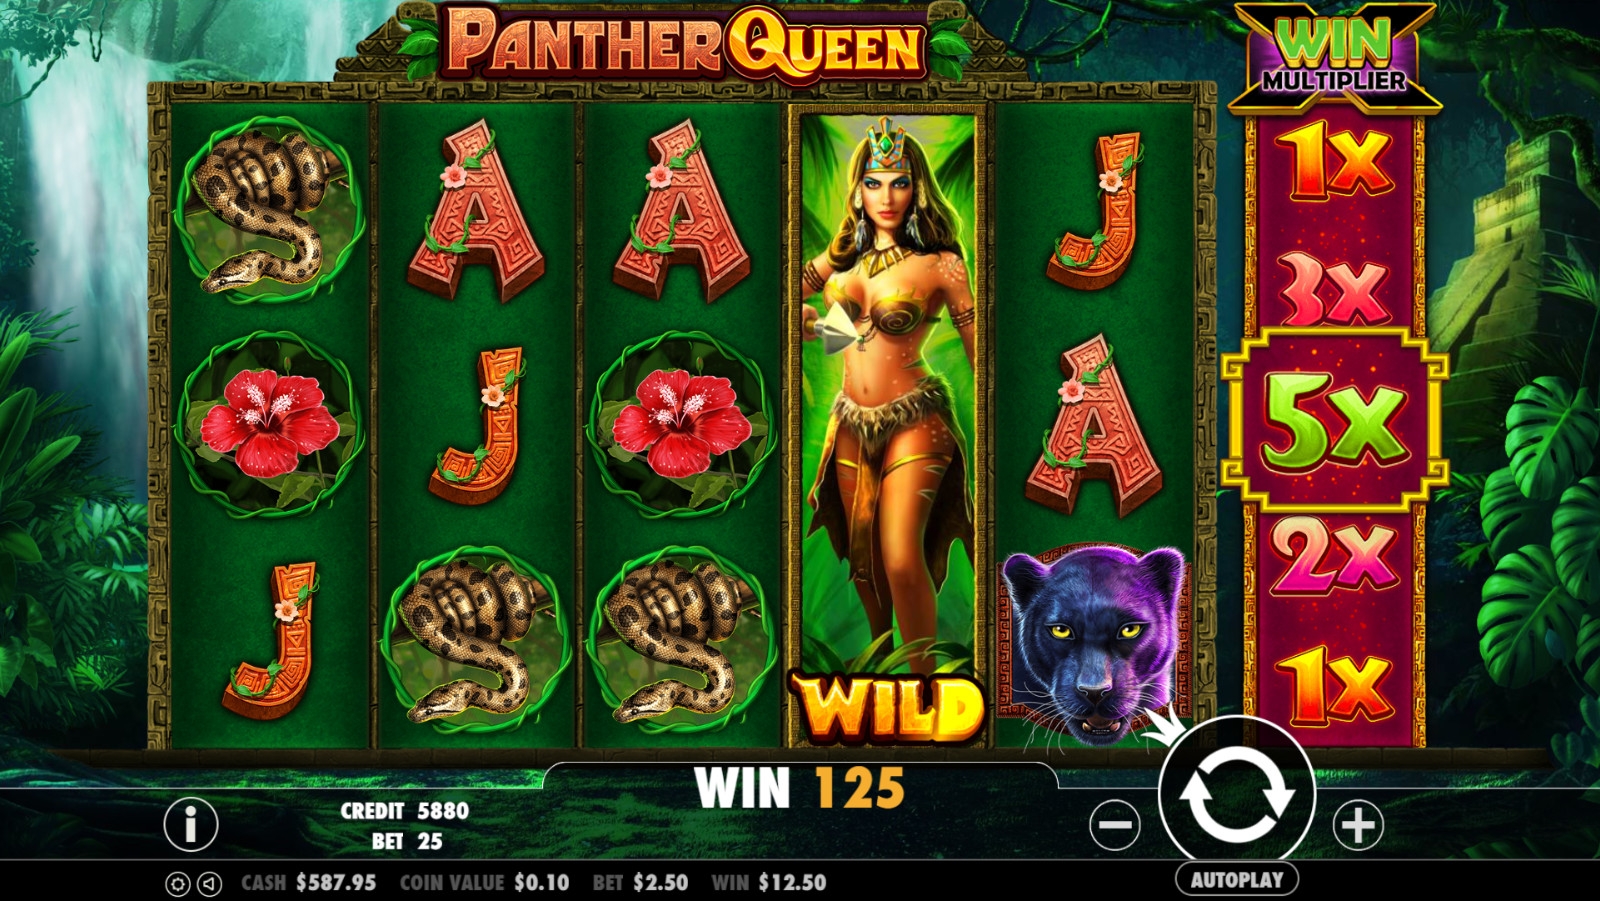 Panther Queen (Panther Queen) from category Slots